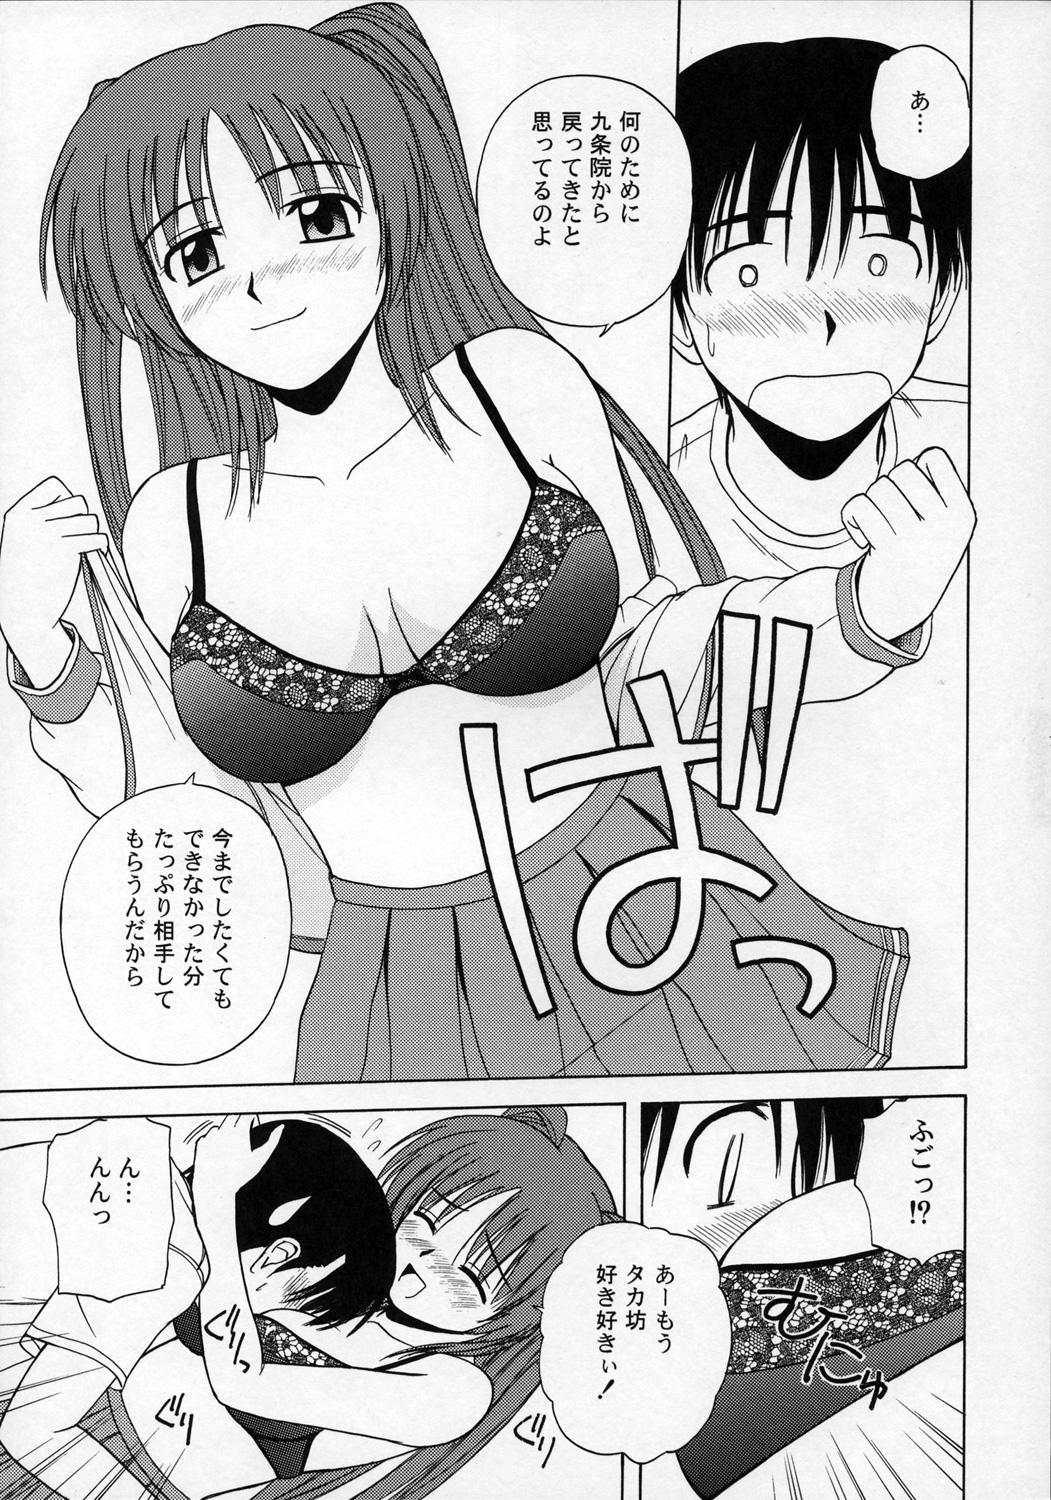 Blackmail Tama-nee to Issho - Toheart2 Alone - Page 6